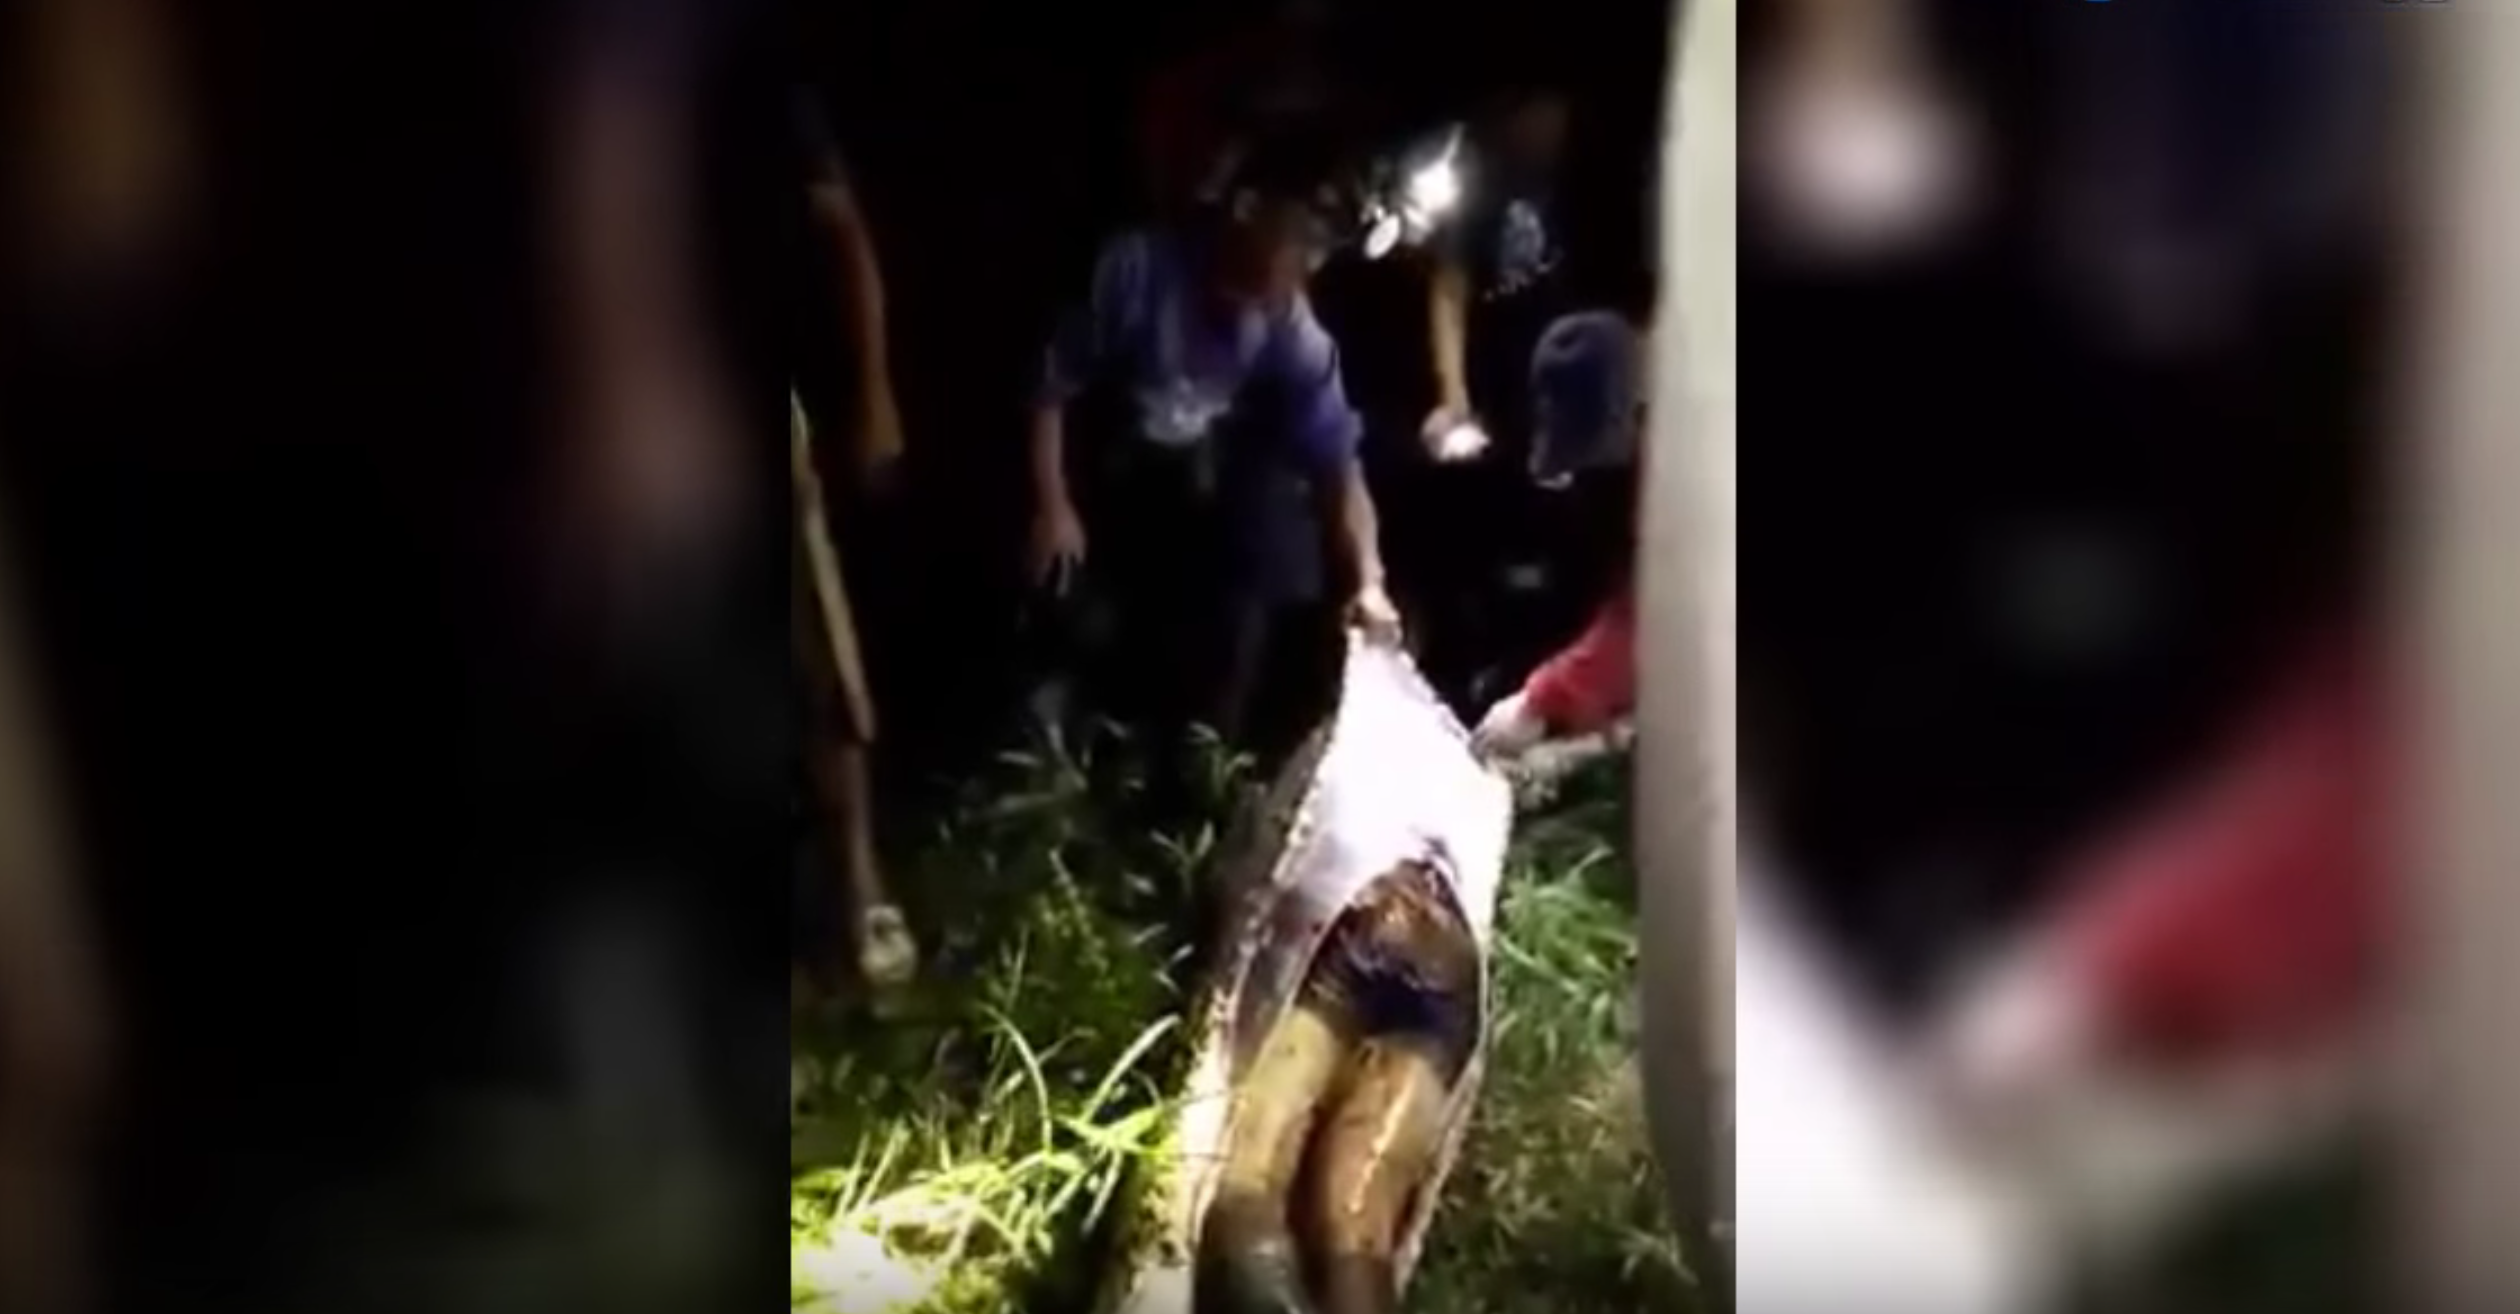 Mind-Blowing Video: Python Sliced Open After Swallowing Man Whole in Indonesia